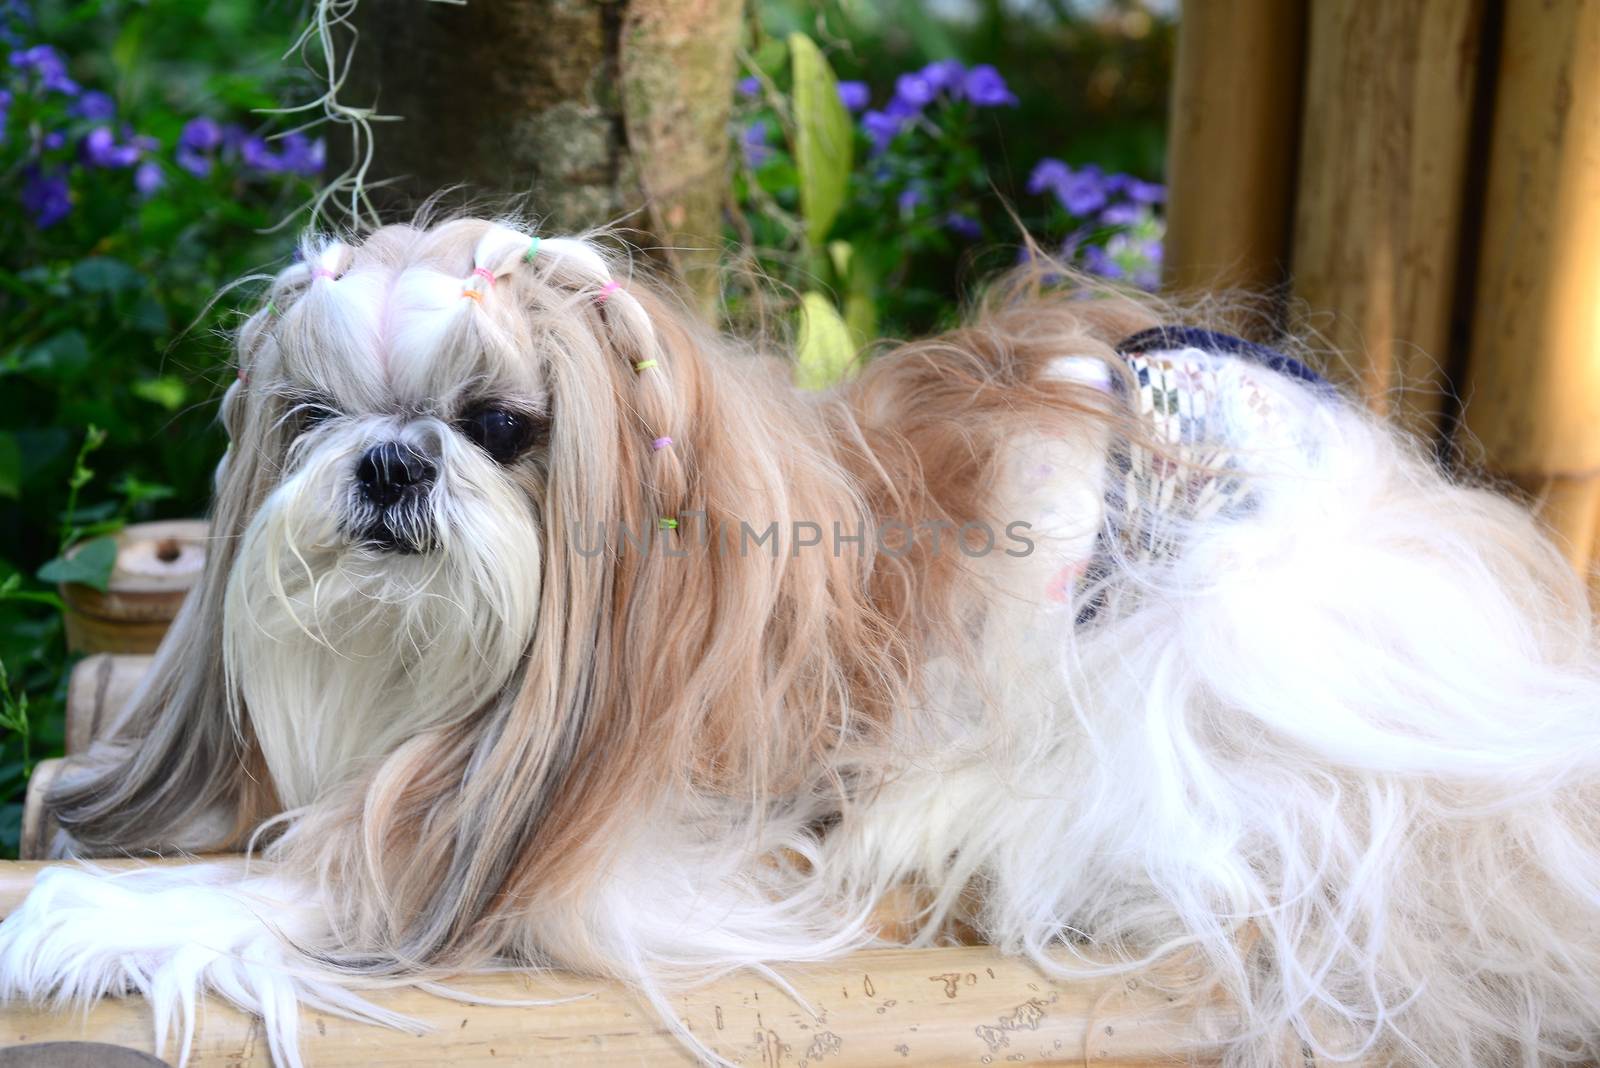 Cute  Shih Tzu dog with long groomed  hair in the garden